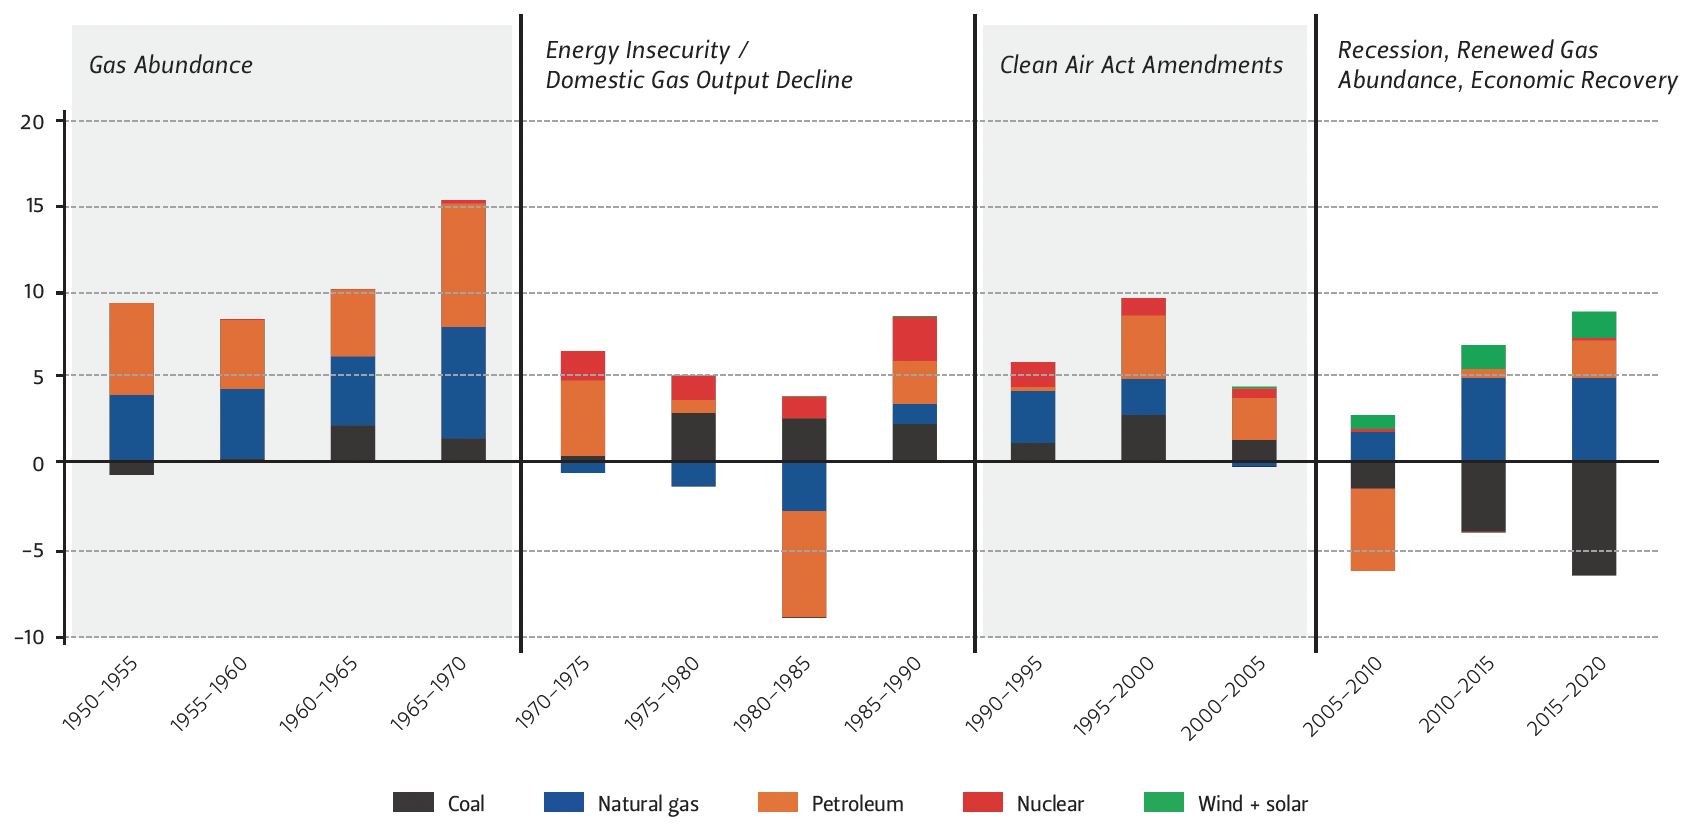 This graph compares U.S. primary energy consumption between 1950 and 2019.